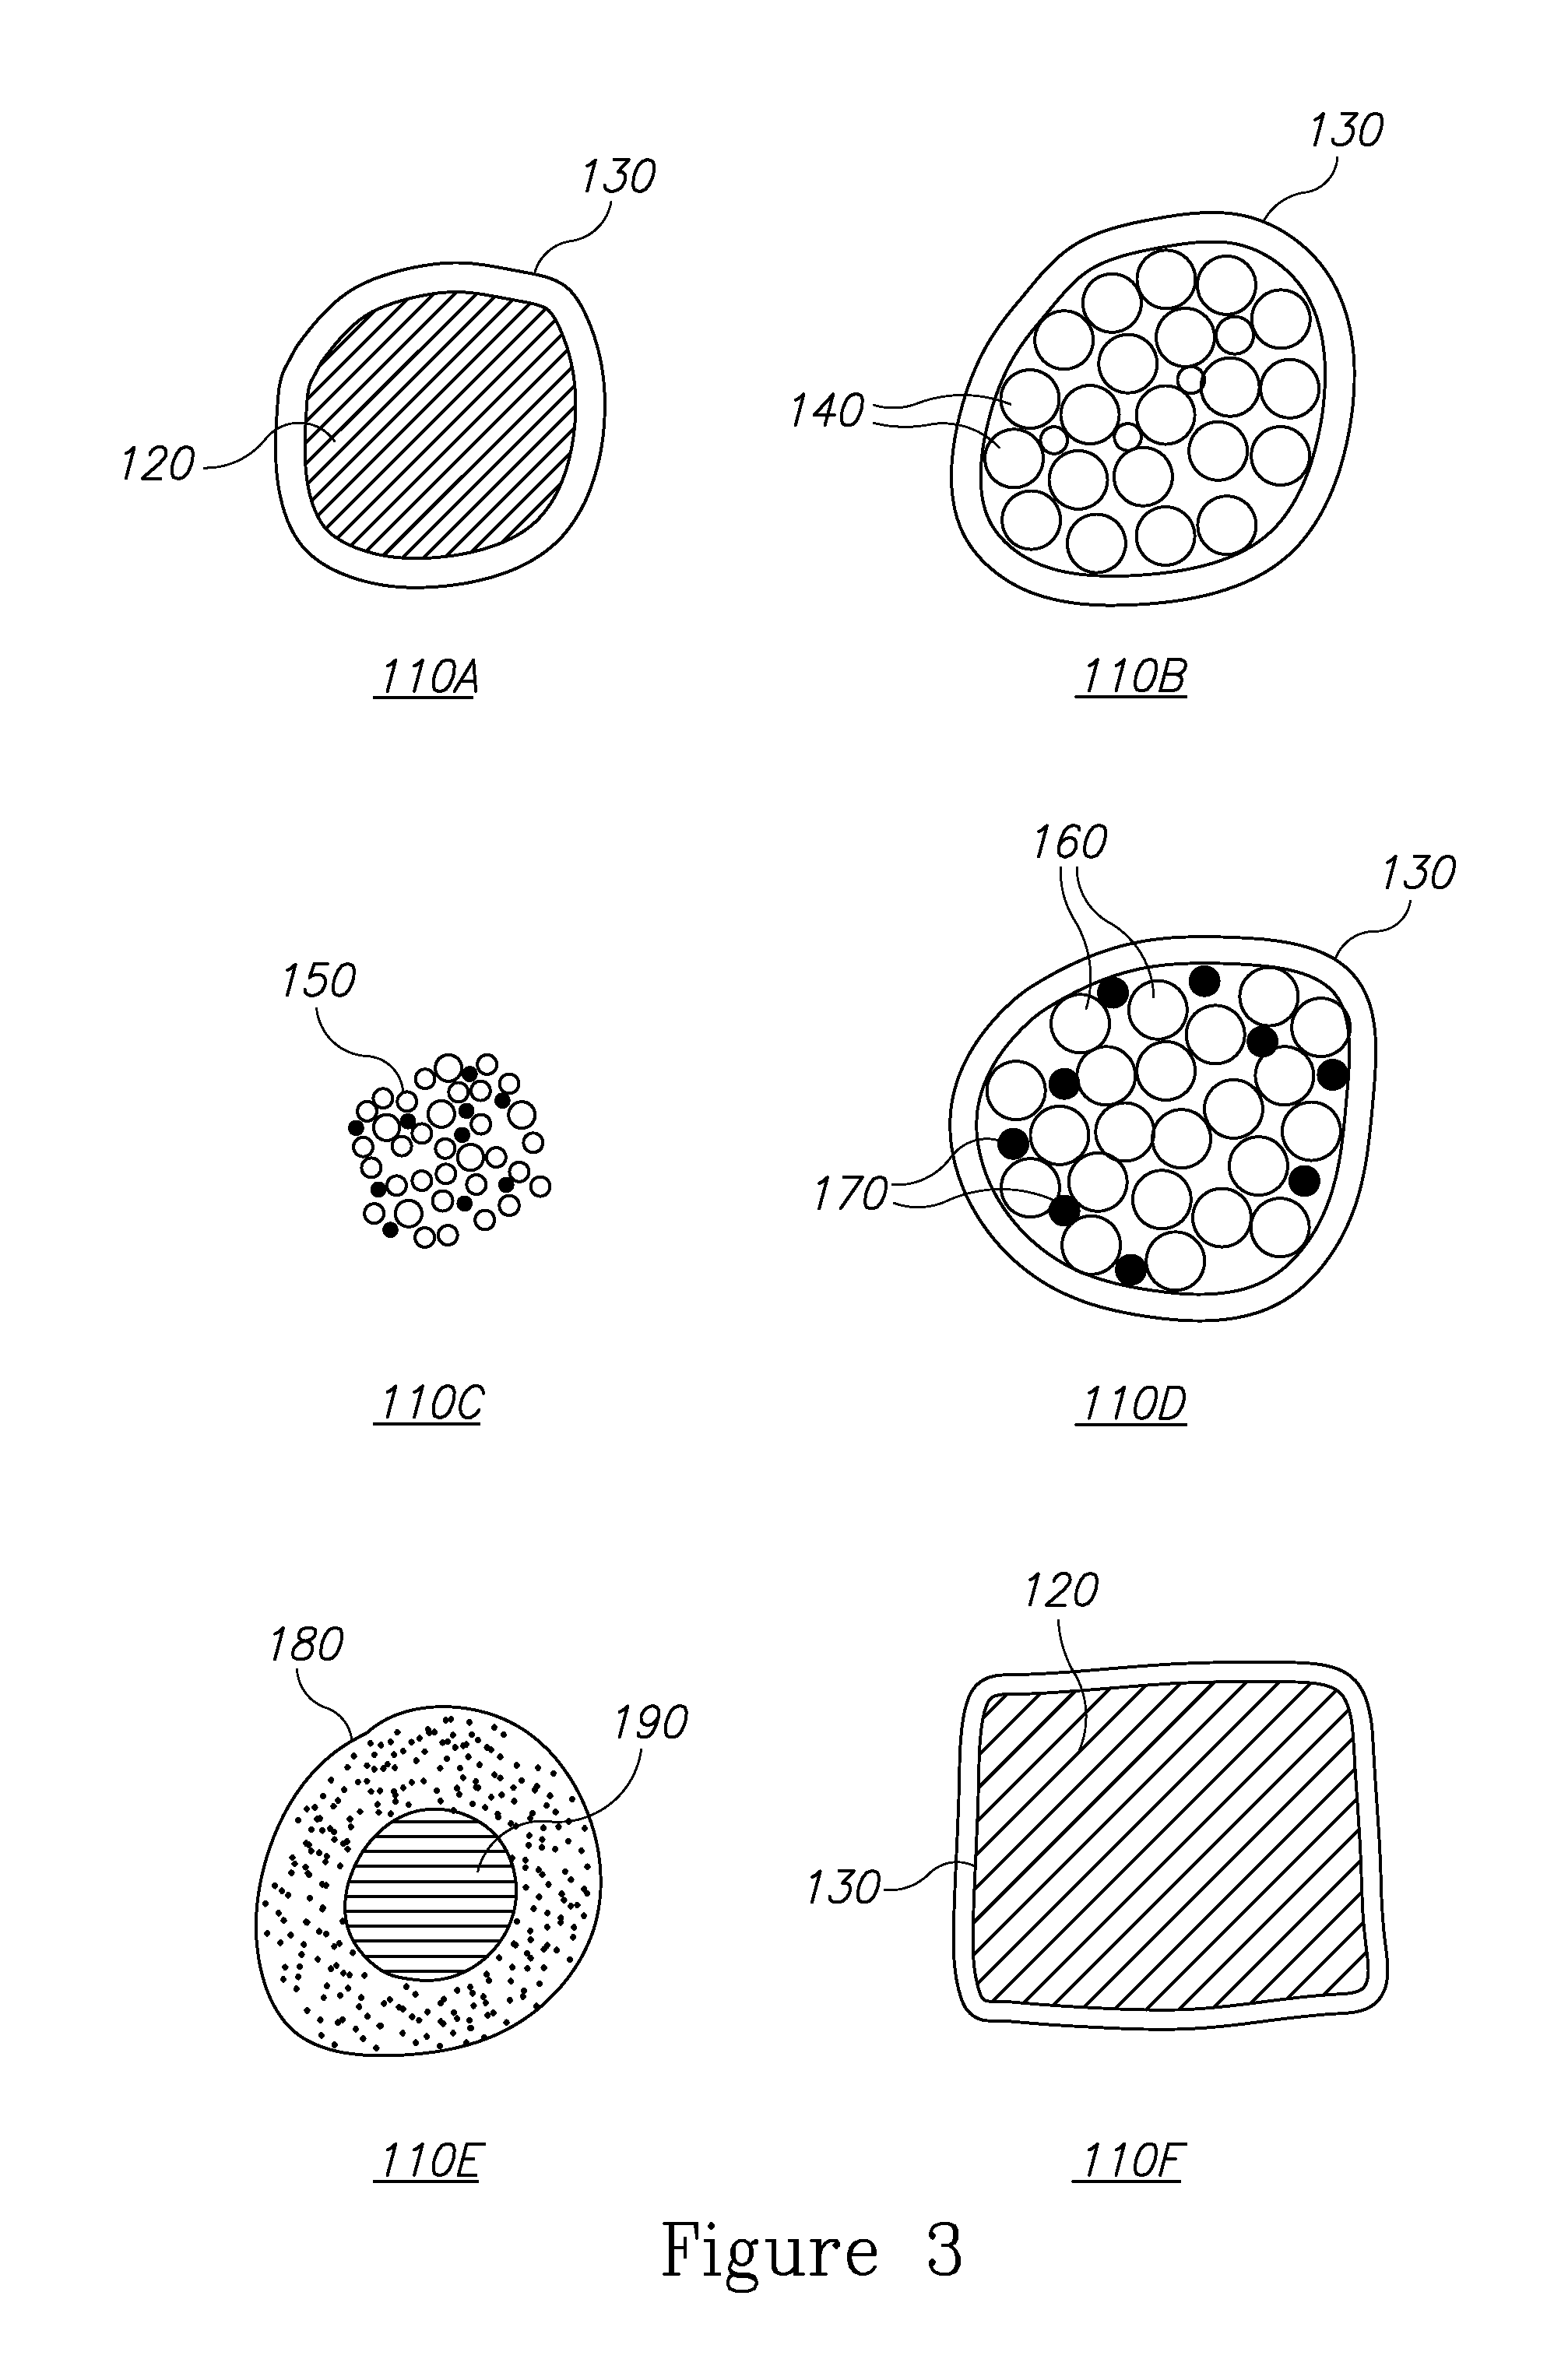 Delivering fluids or granular substances by projecting shelled portions thereof